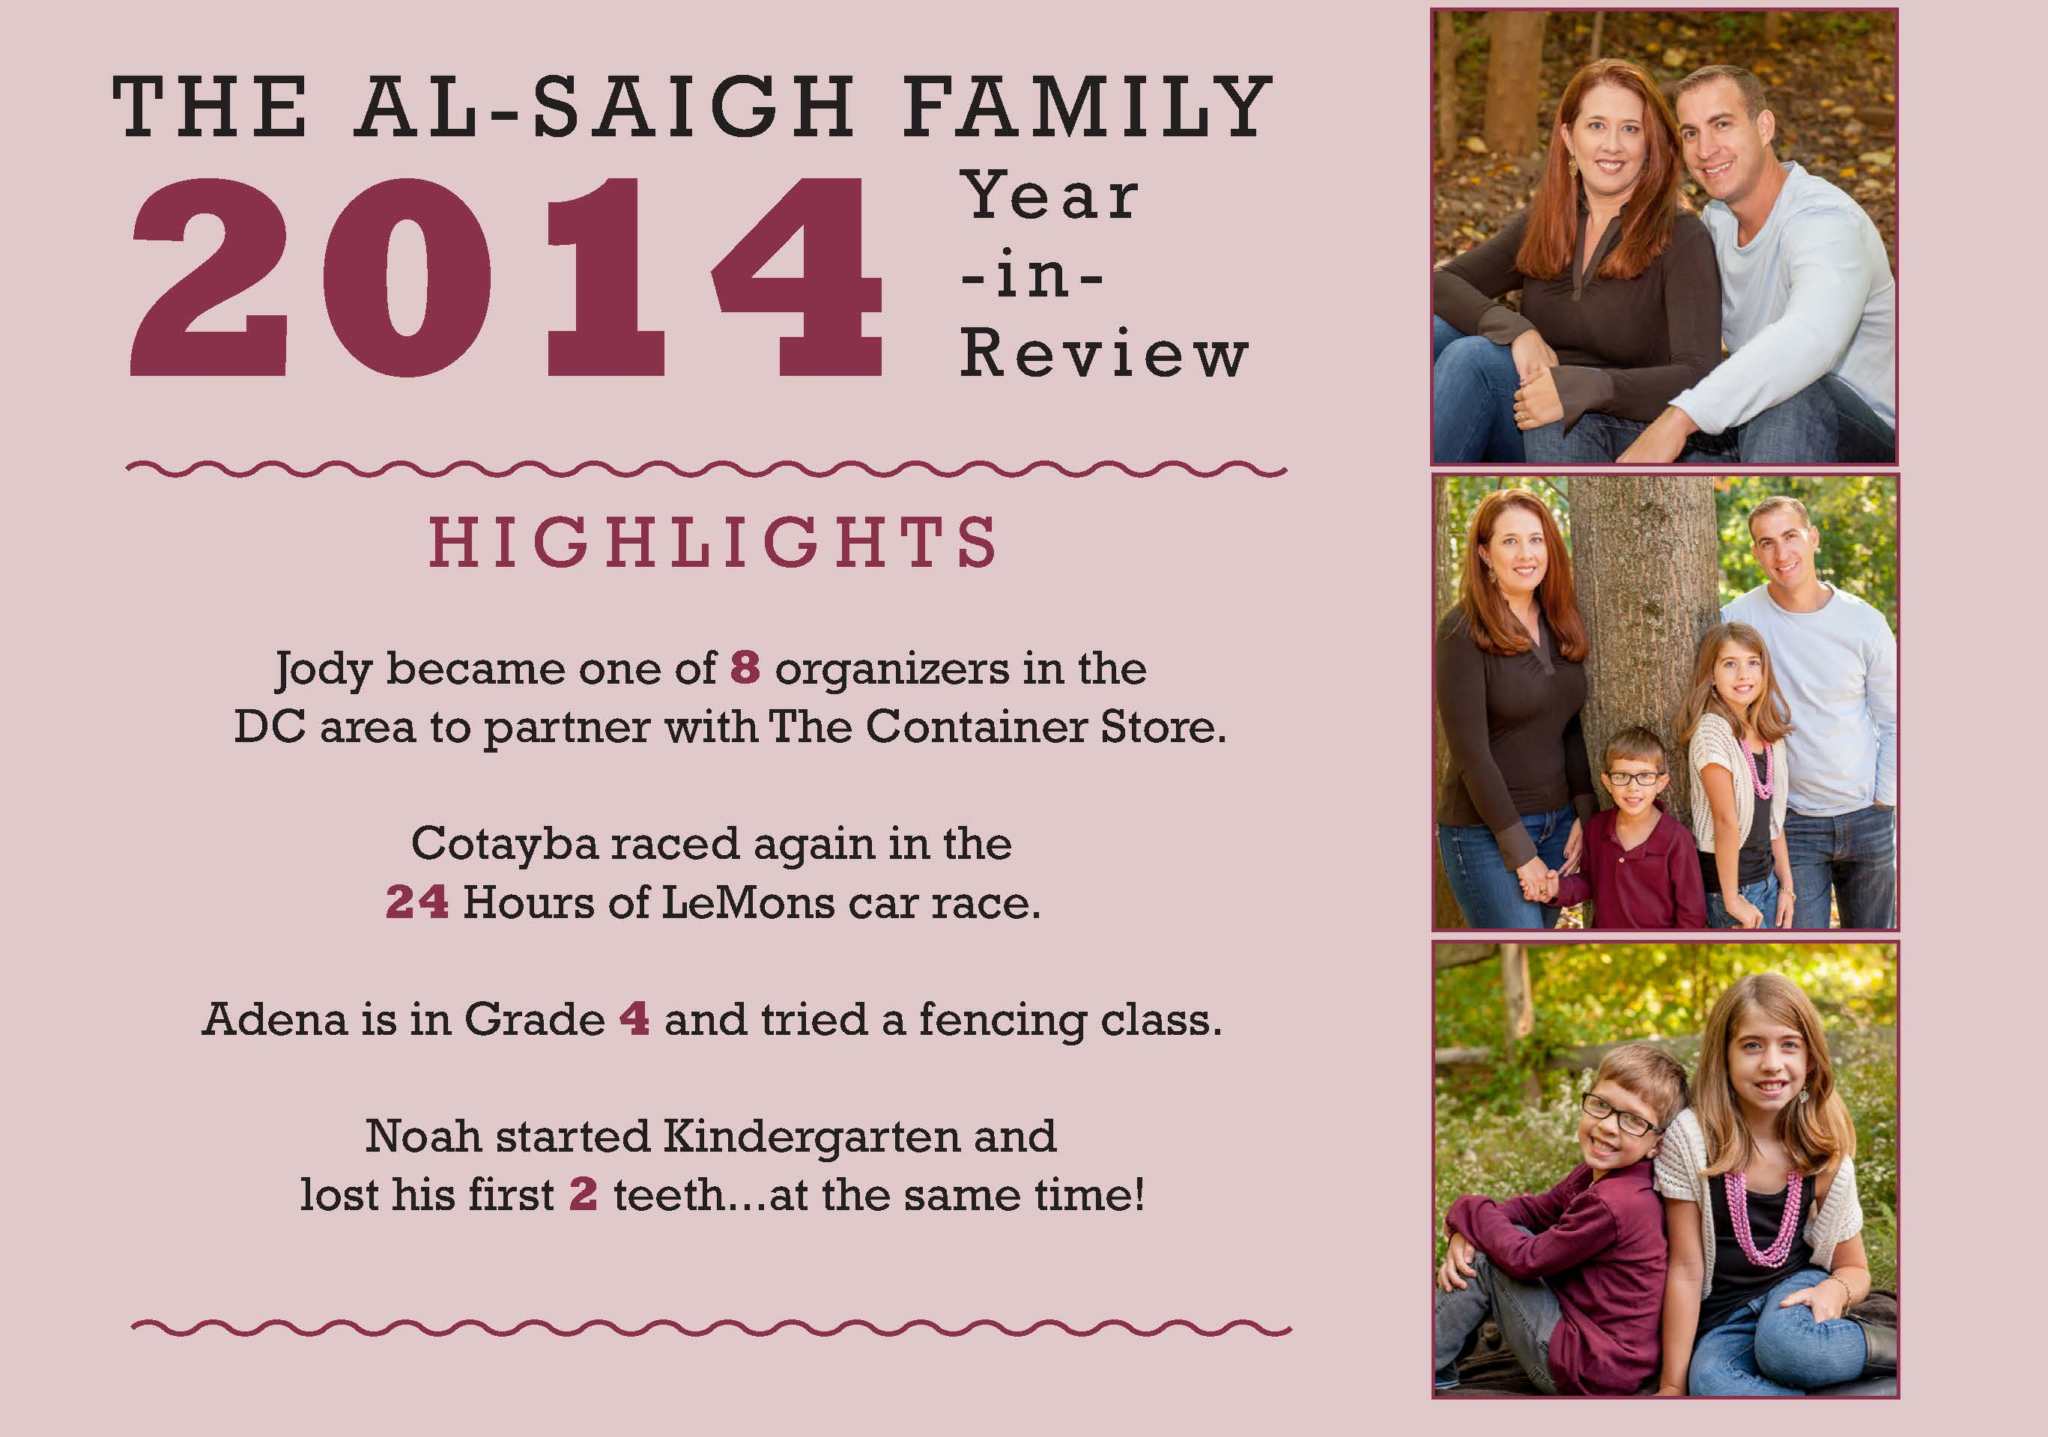 2014 holiday card_Page_3